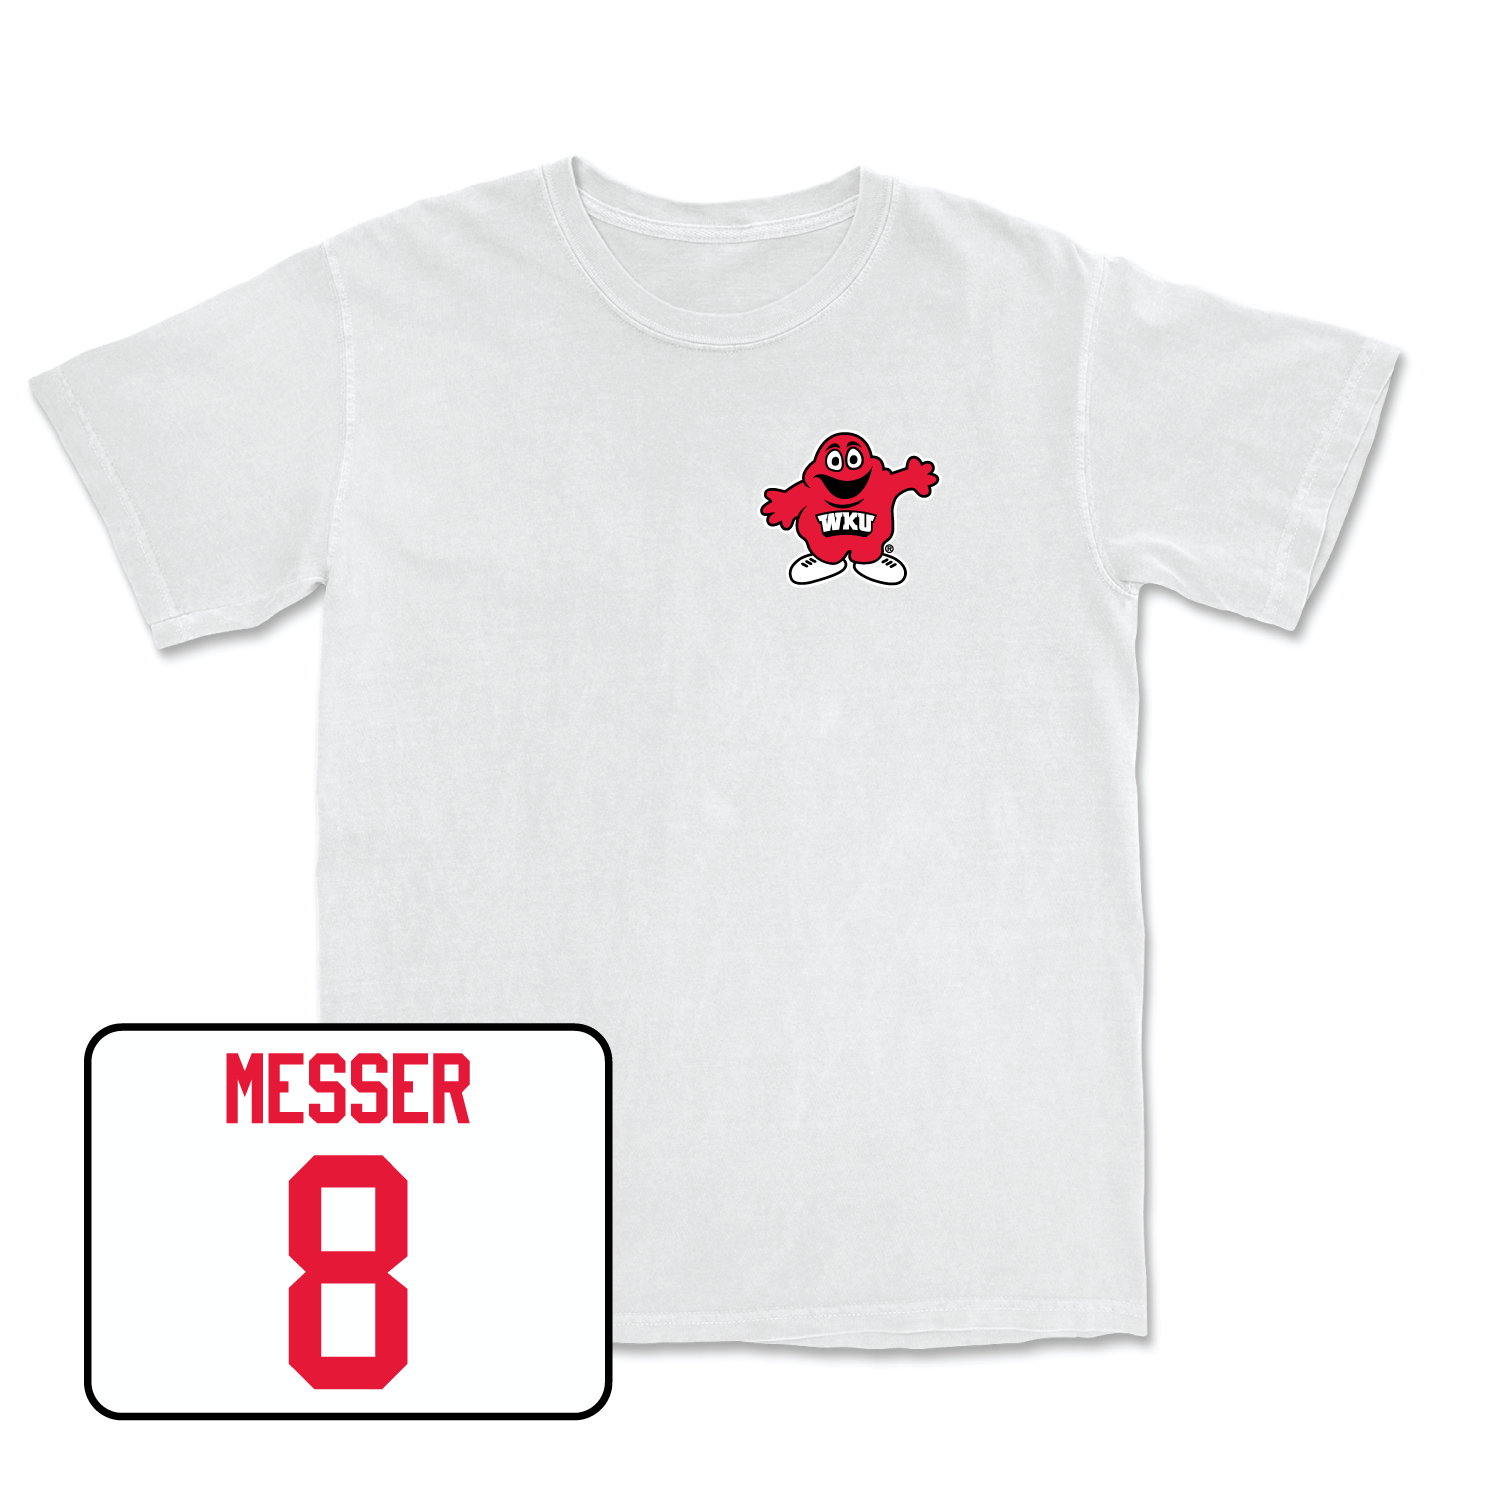 White Football Big Red Comfort Colors Tee 2 Large / Easton Messer | #8